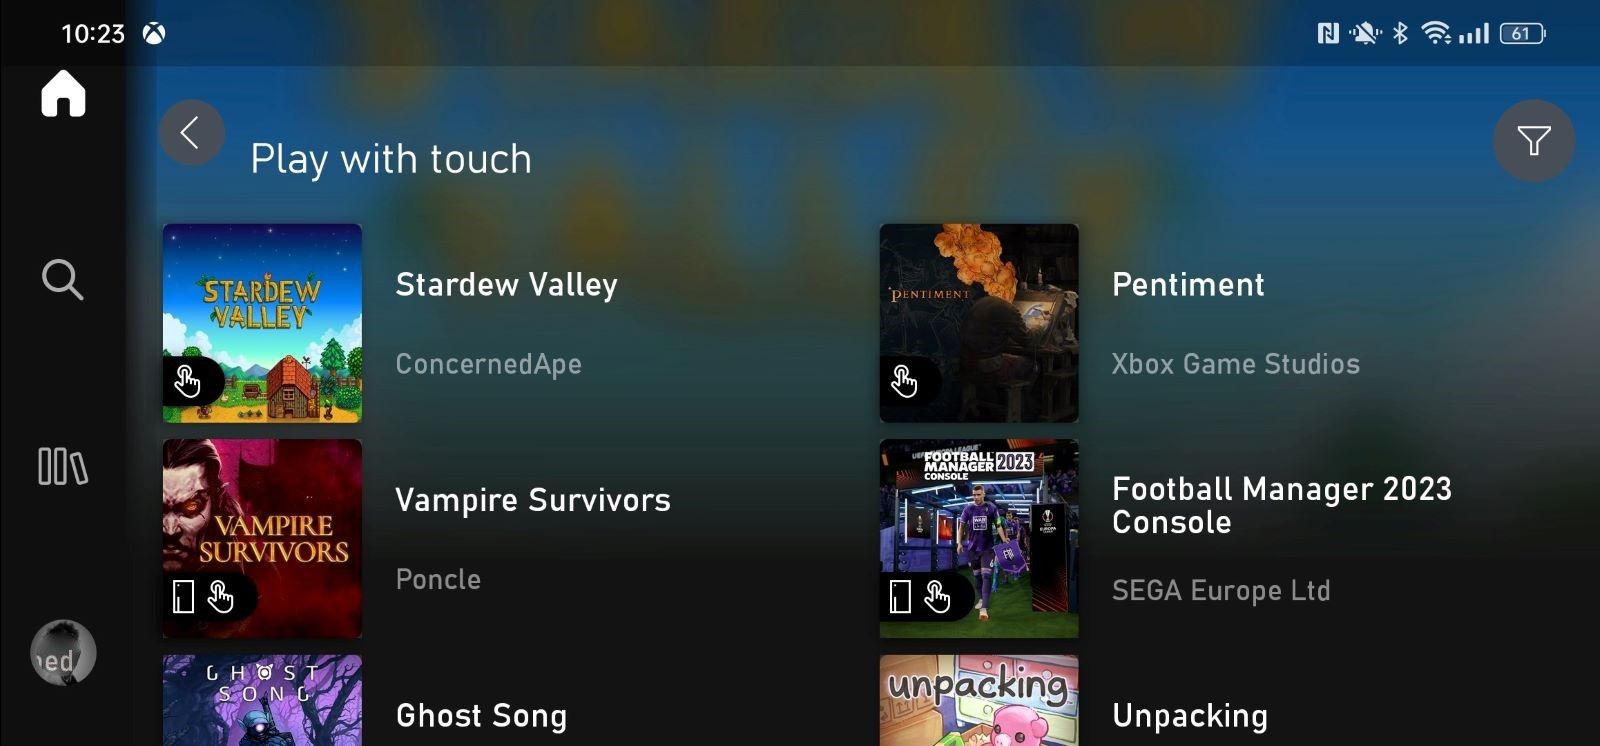 A screenshot of the titles available through the Play With Touch category of Xbox Game Pass